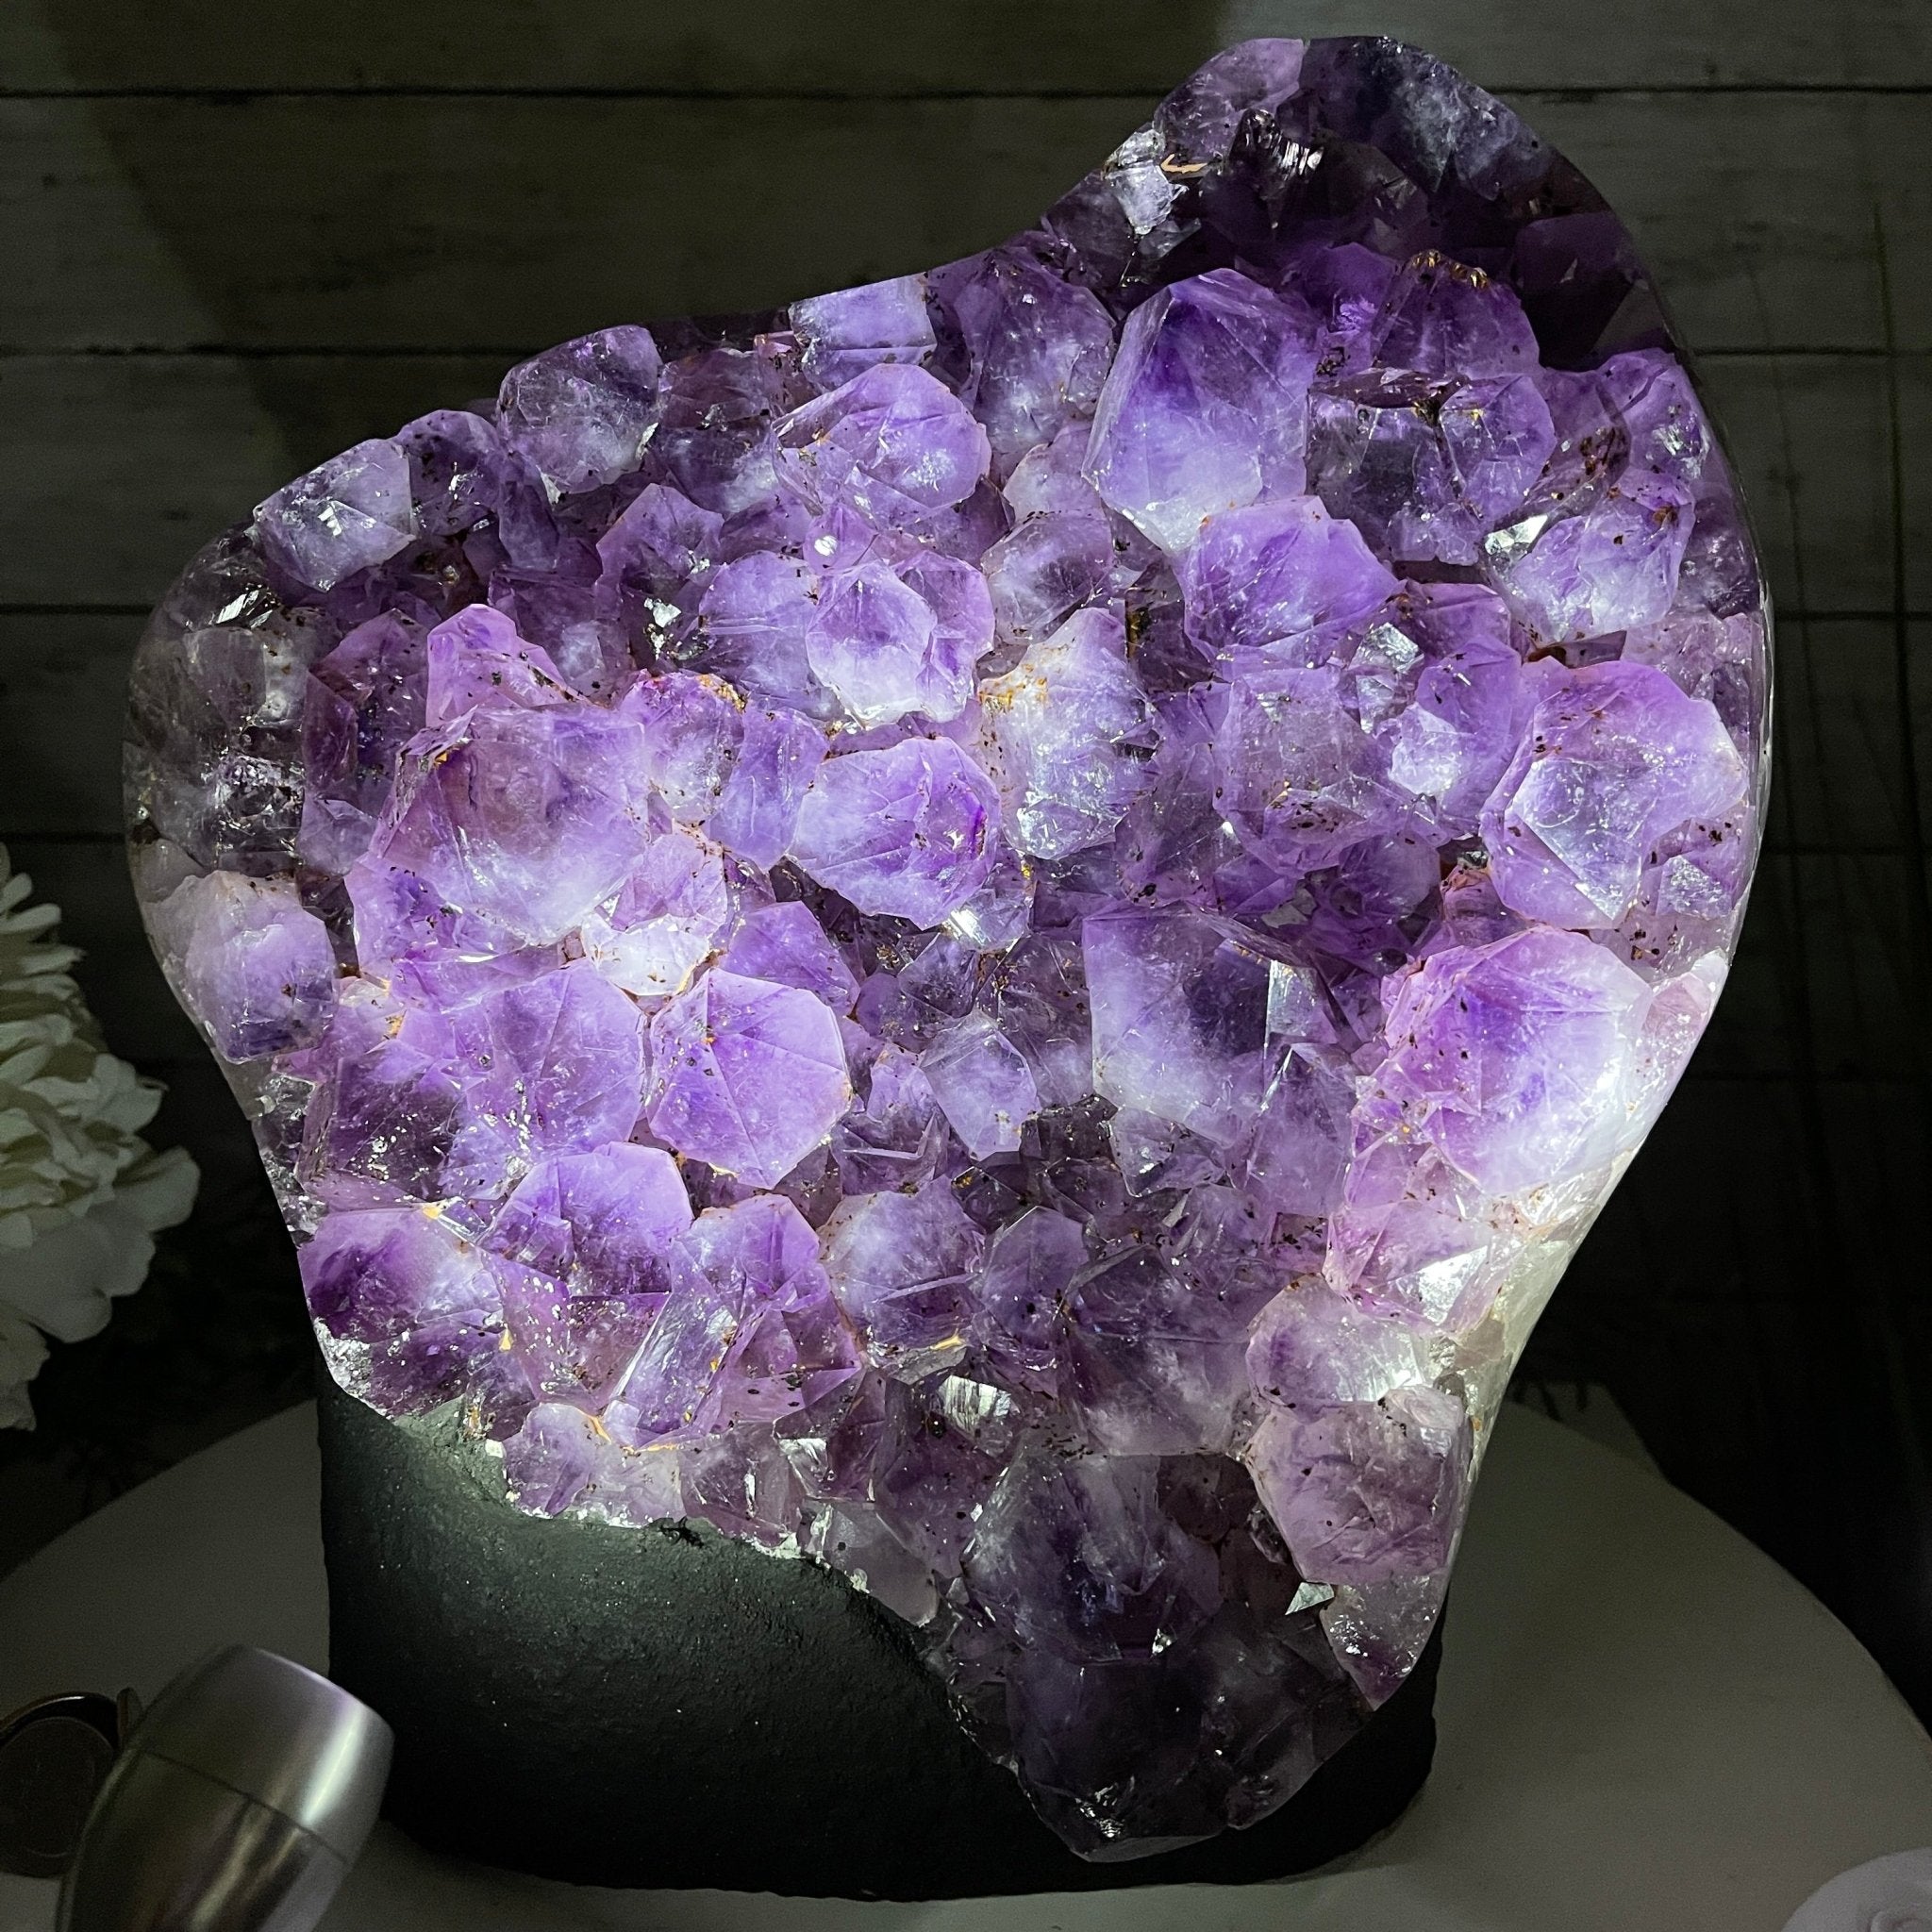 Extra Quality Amethyst Druse Cluster on Cement Base, 24 lbs and 10.5" Tall #5614-0026 - Brazil GemsBrazil GemsExtra Quality Amethyst Druse Cluster on Cement Base, 24 lbs and 10.5" Tall #5614-0026Clusters on Cement Bases5614-0026